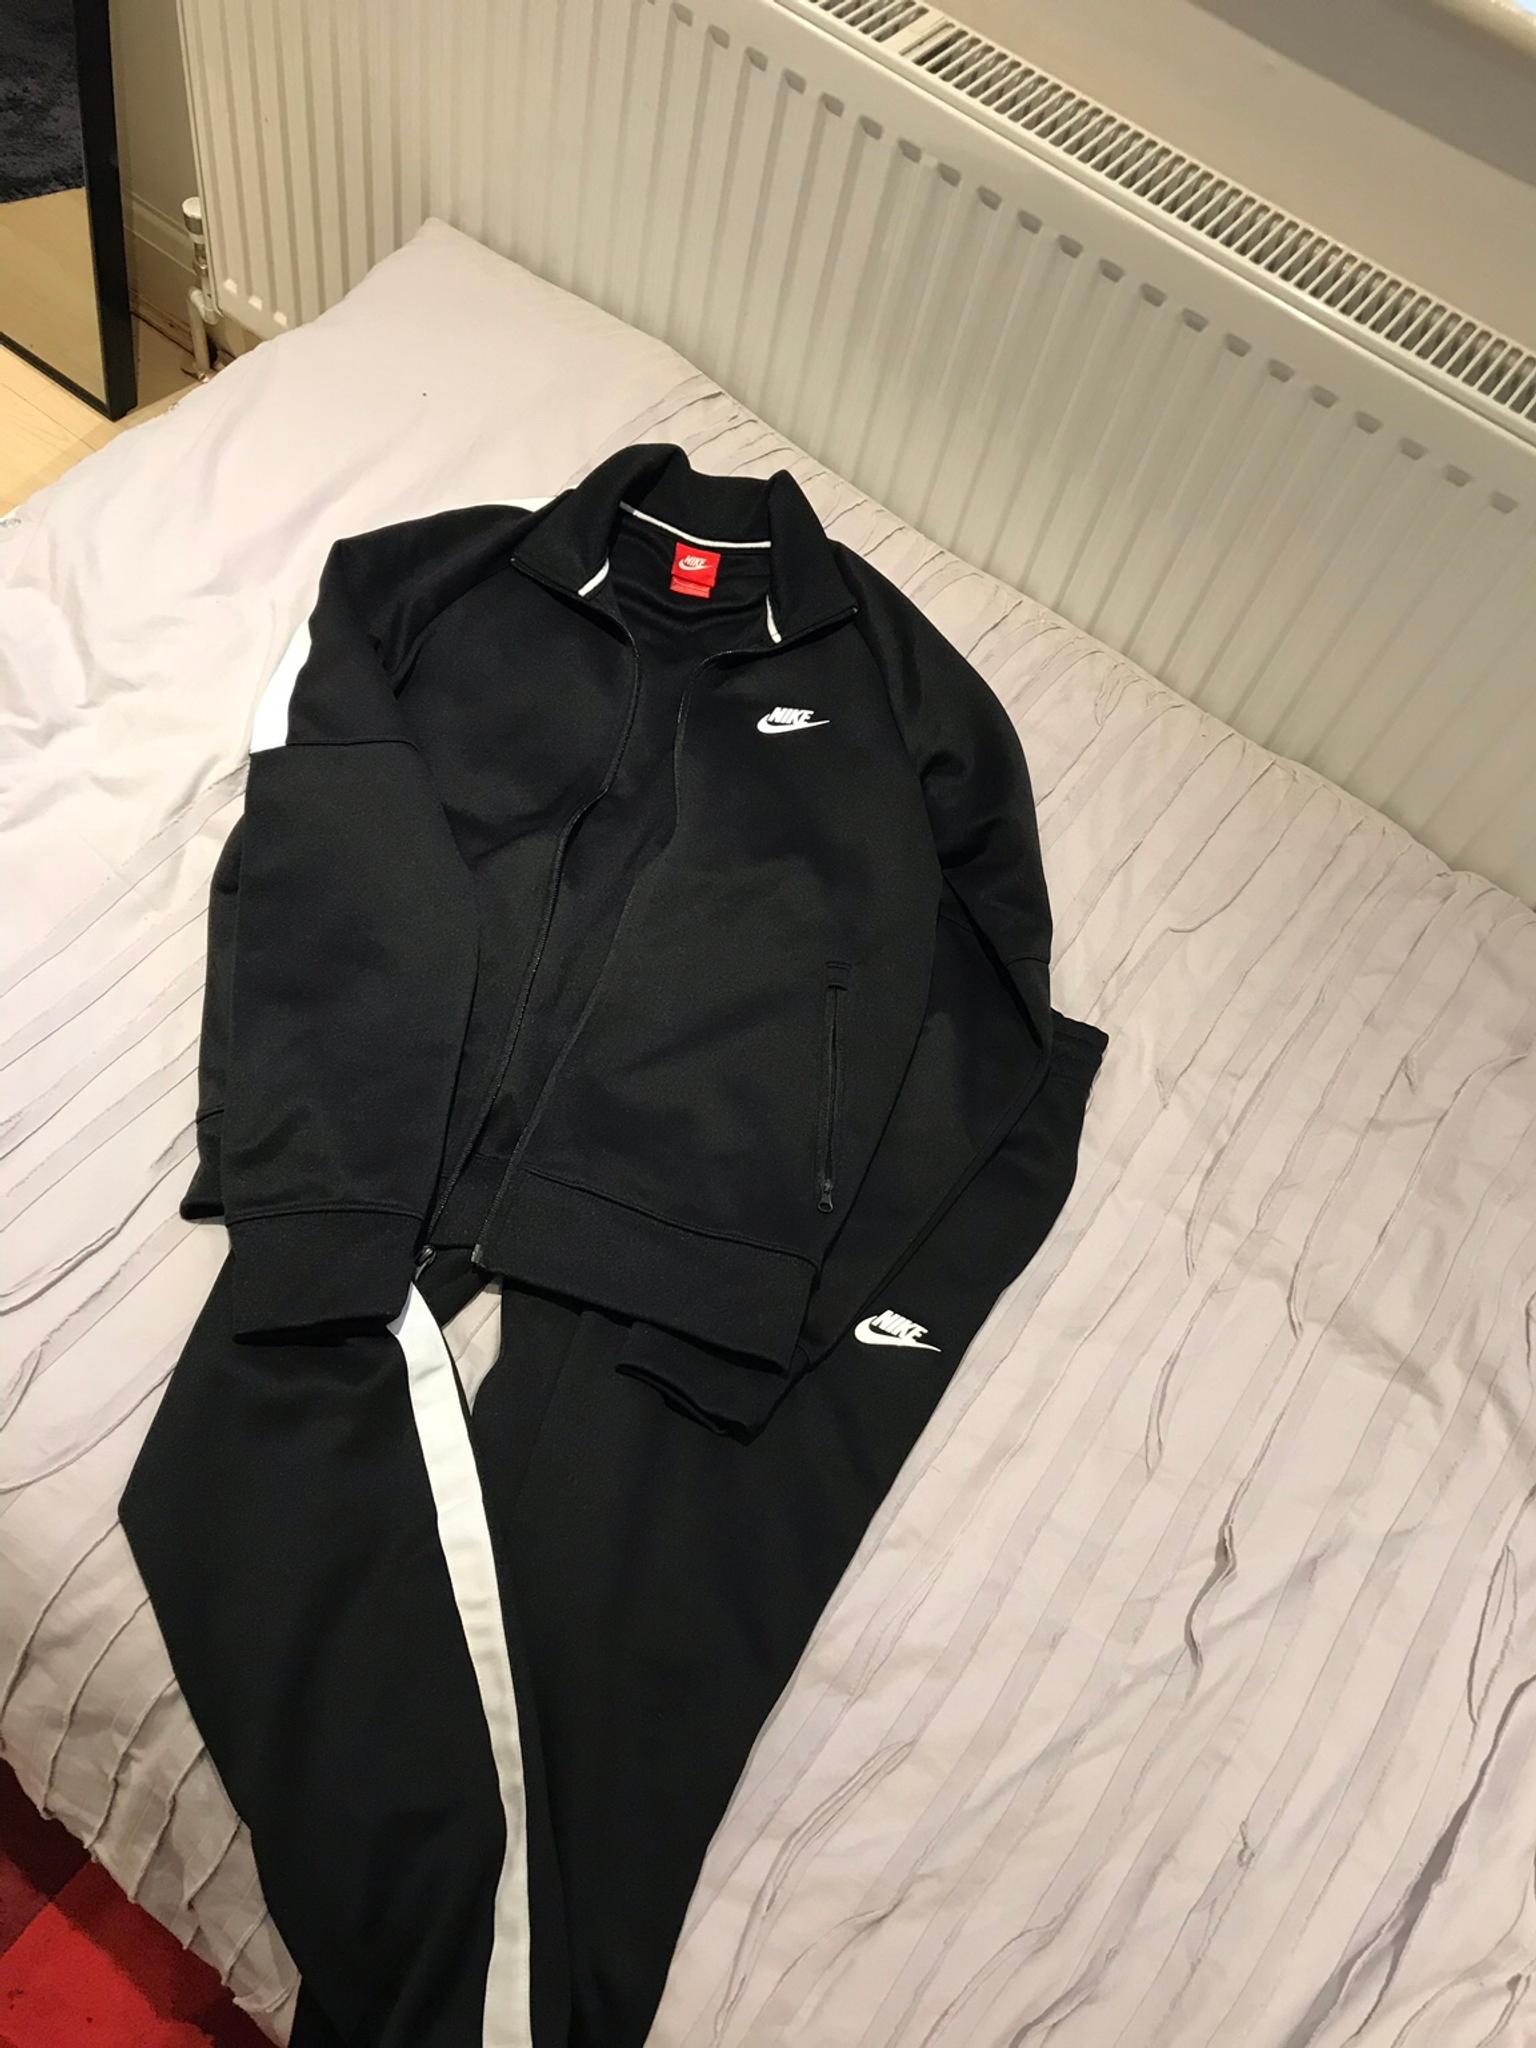 small nike tracksuit